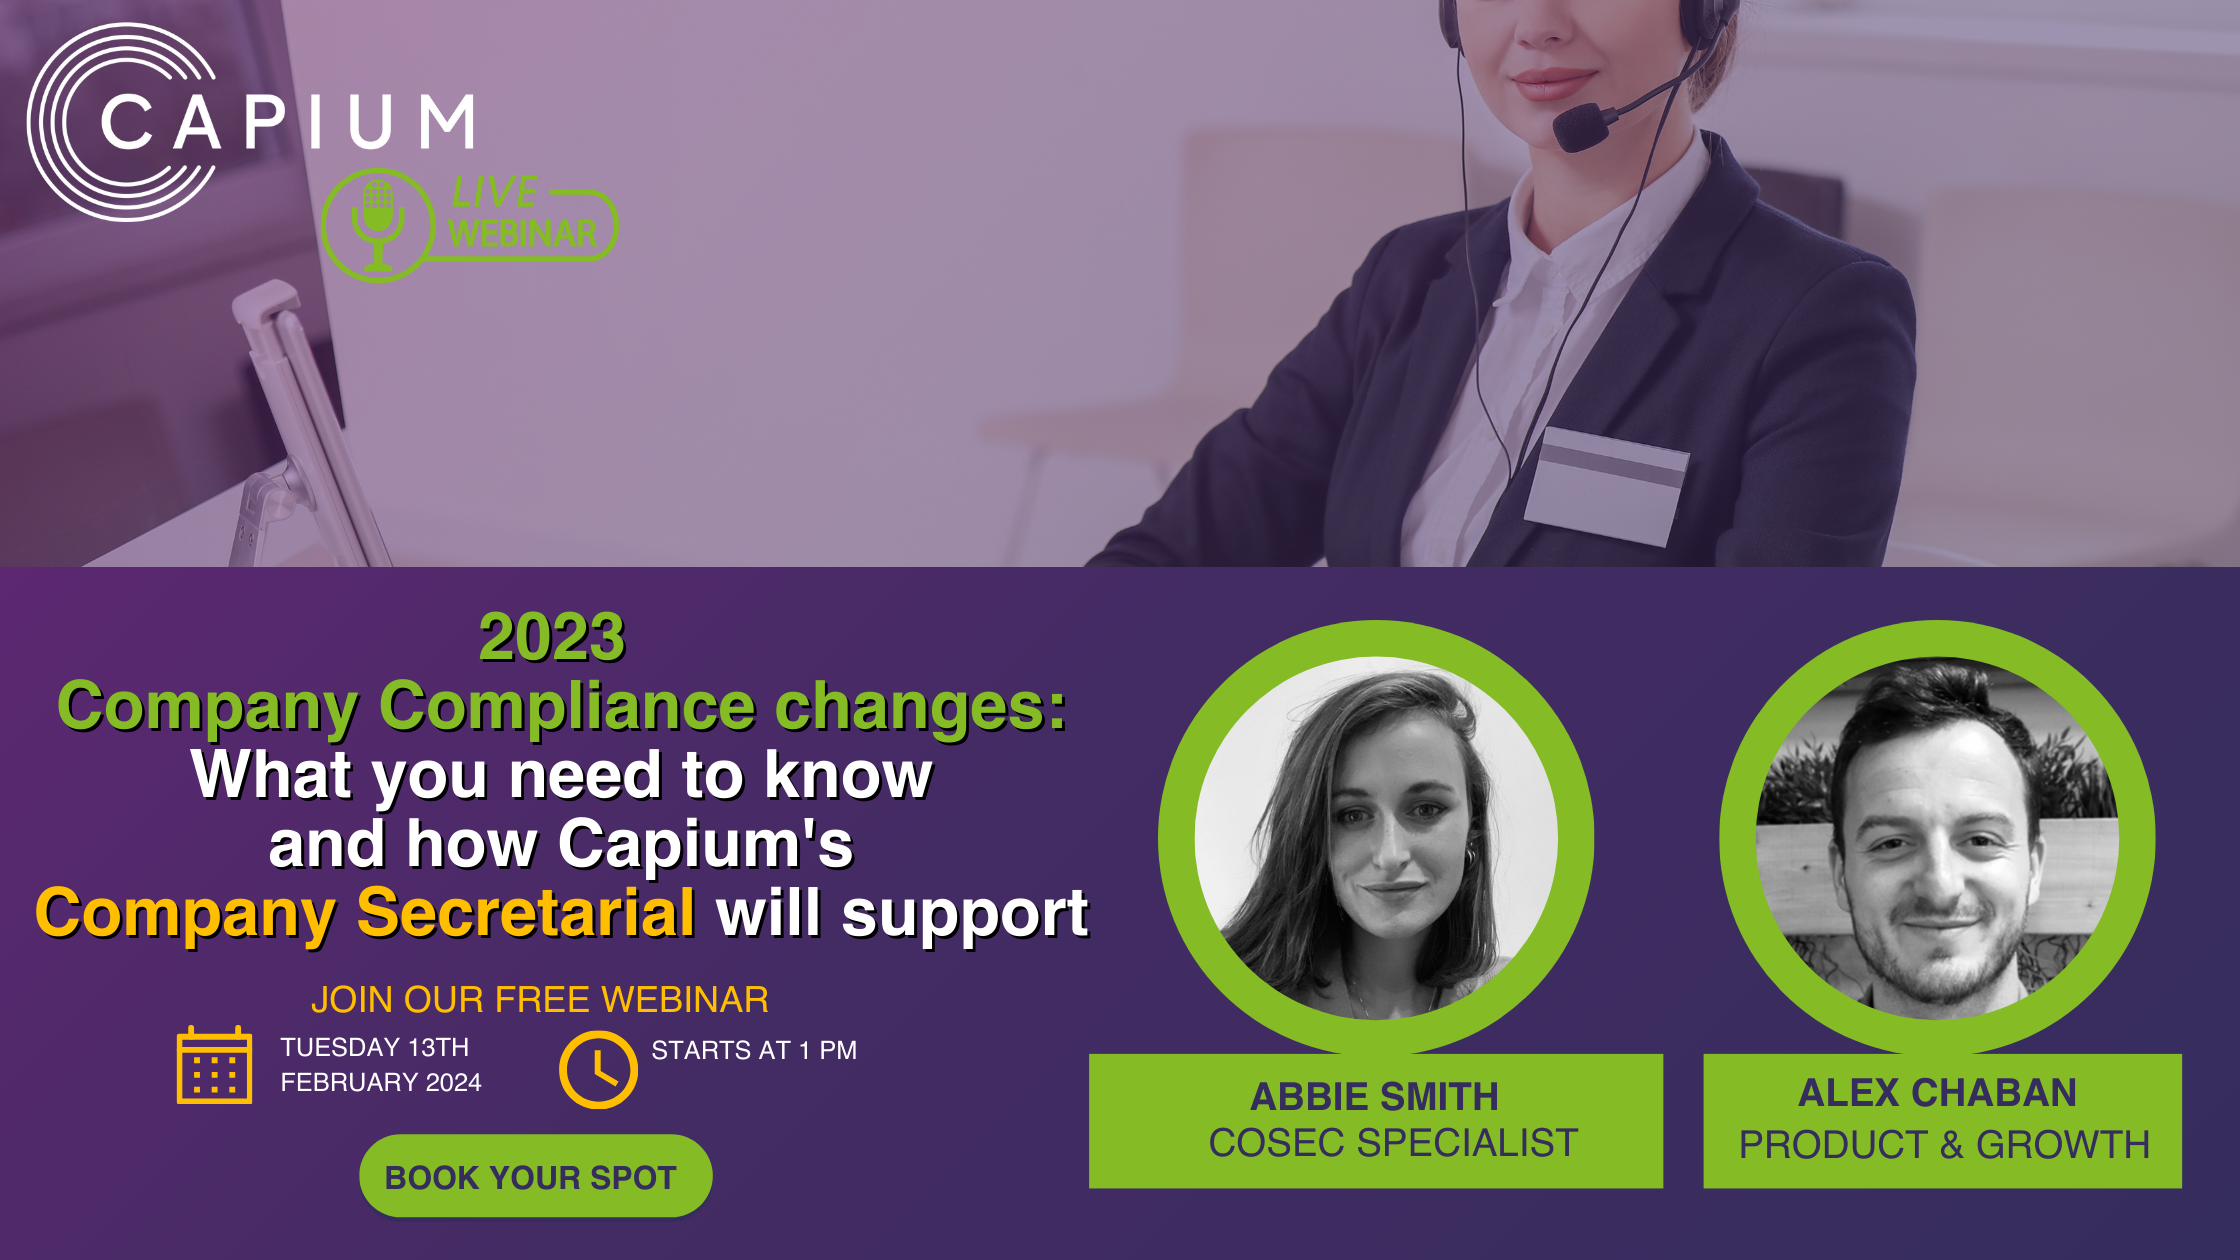 2023 Company Compliance changes: What you need to know and how Capium's Company Secretarial will support logo